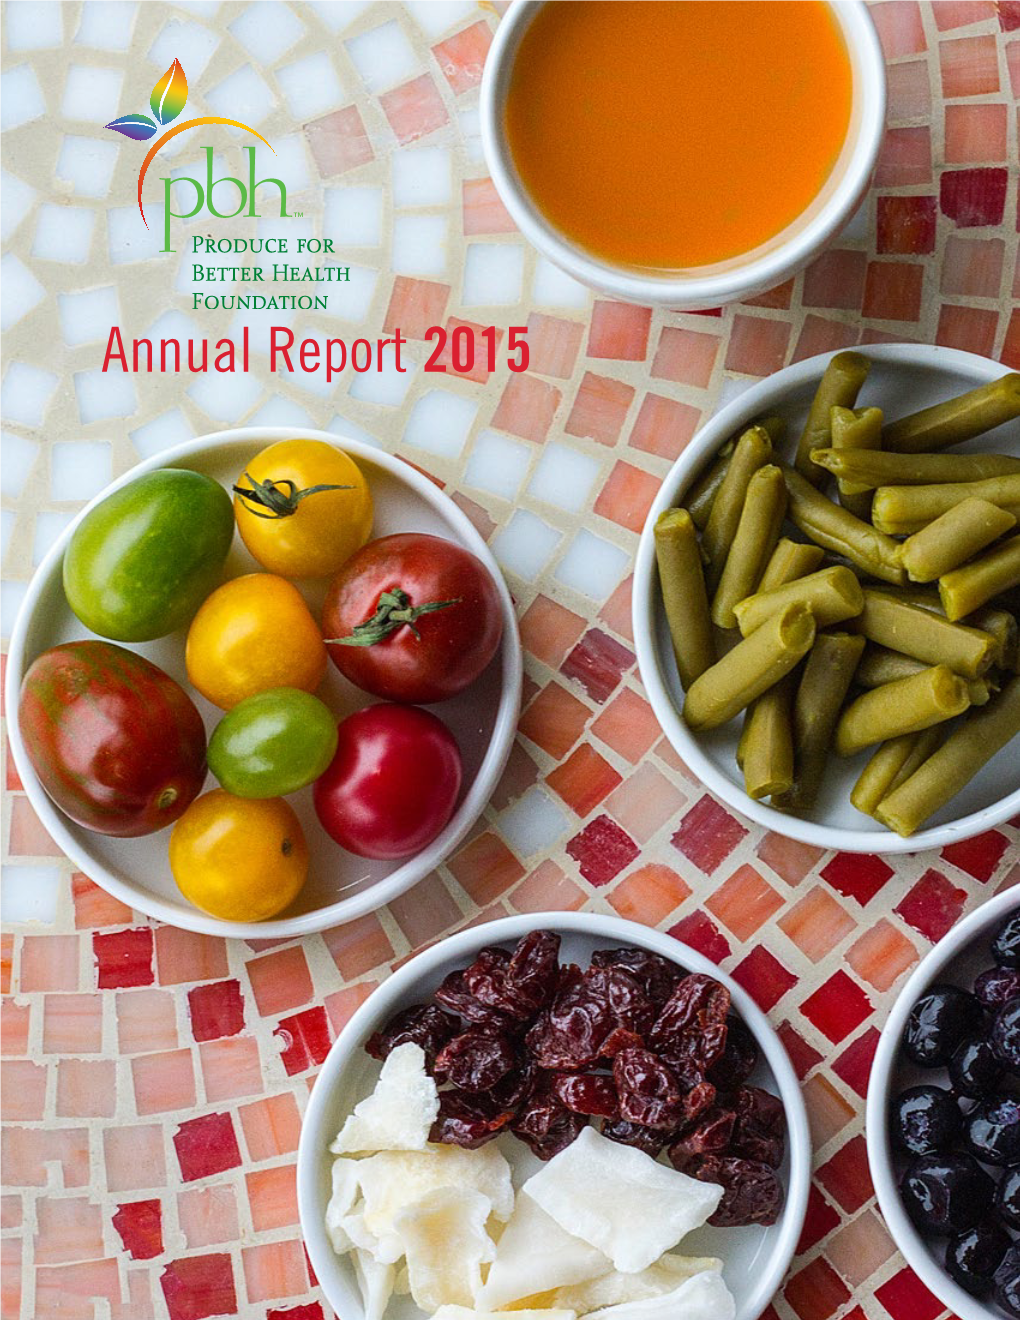 Annual Report 2015 Reaching Moms & Families Through Joint Letter from Chairman & President PBH’S Annual Conference